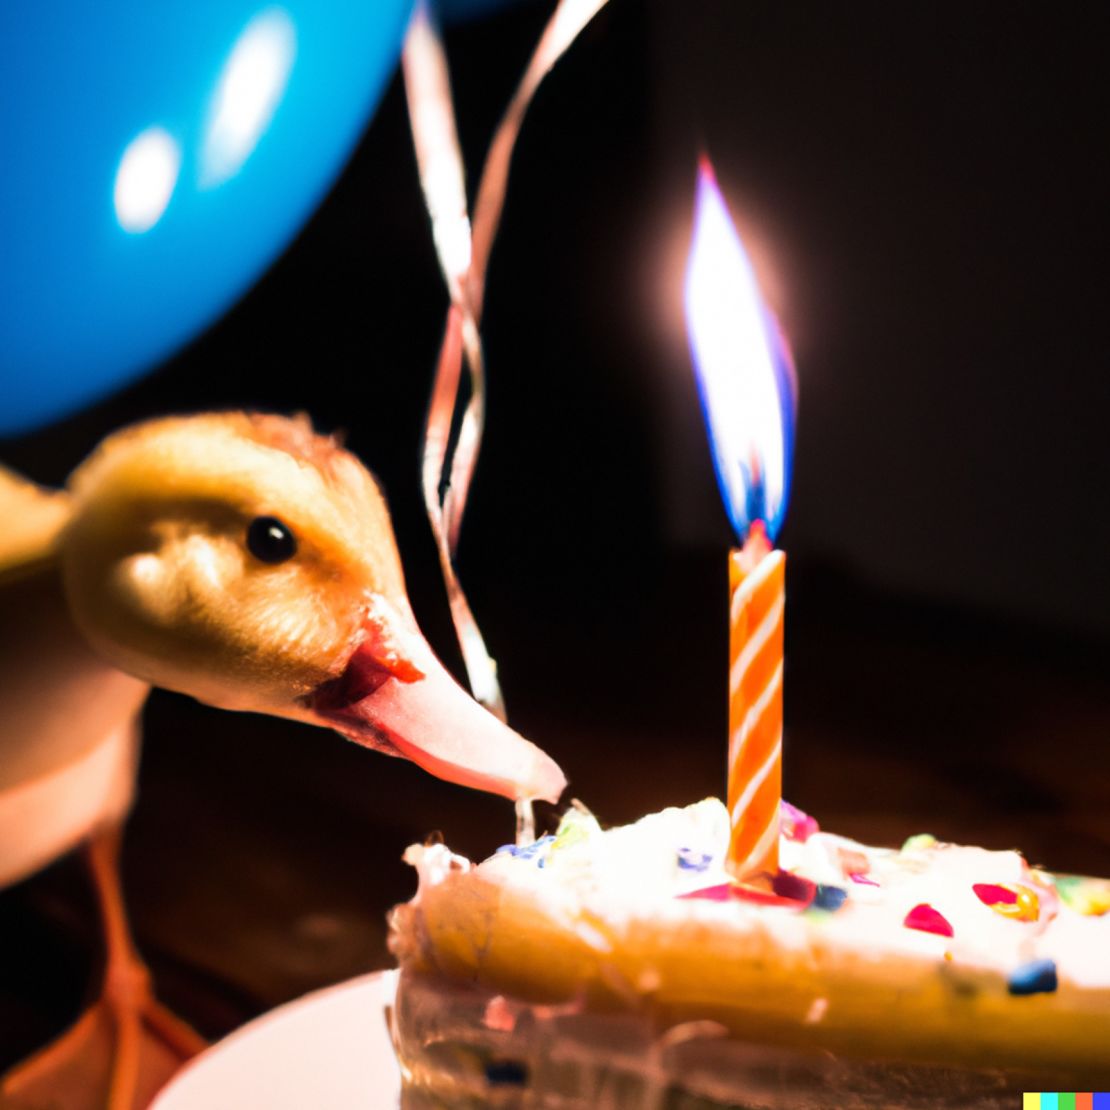 This image of a duck blowing out a candle on a cake was created by CNN's Rachel Metz via DALL-E 2.